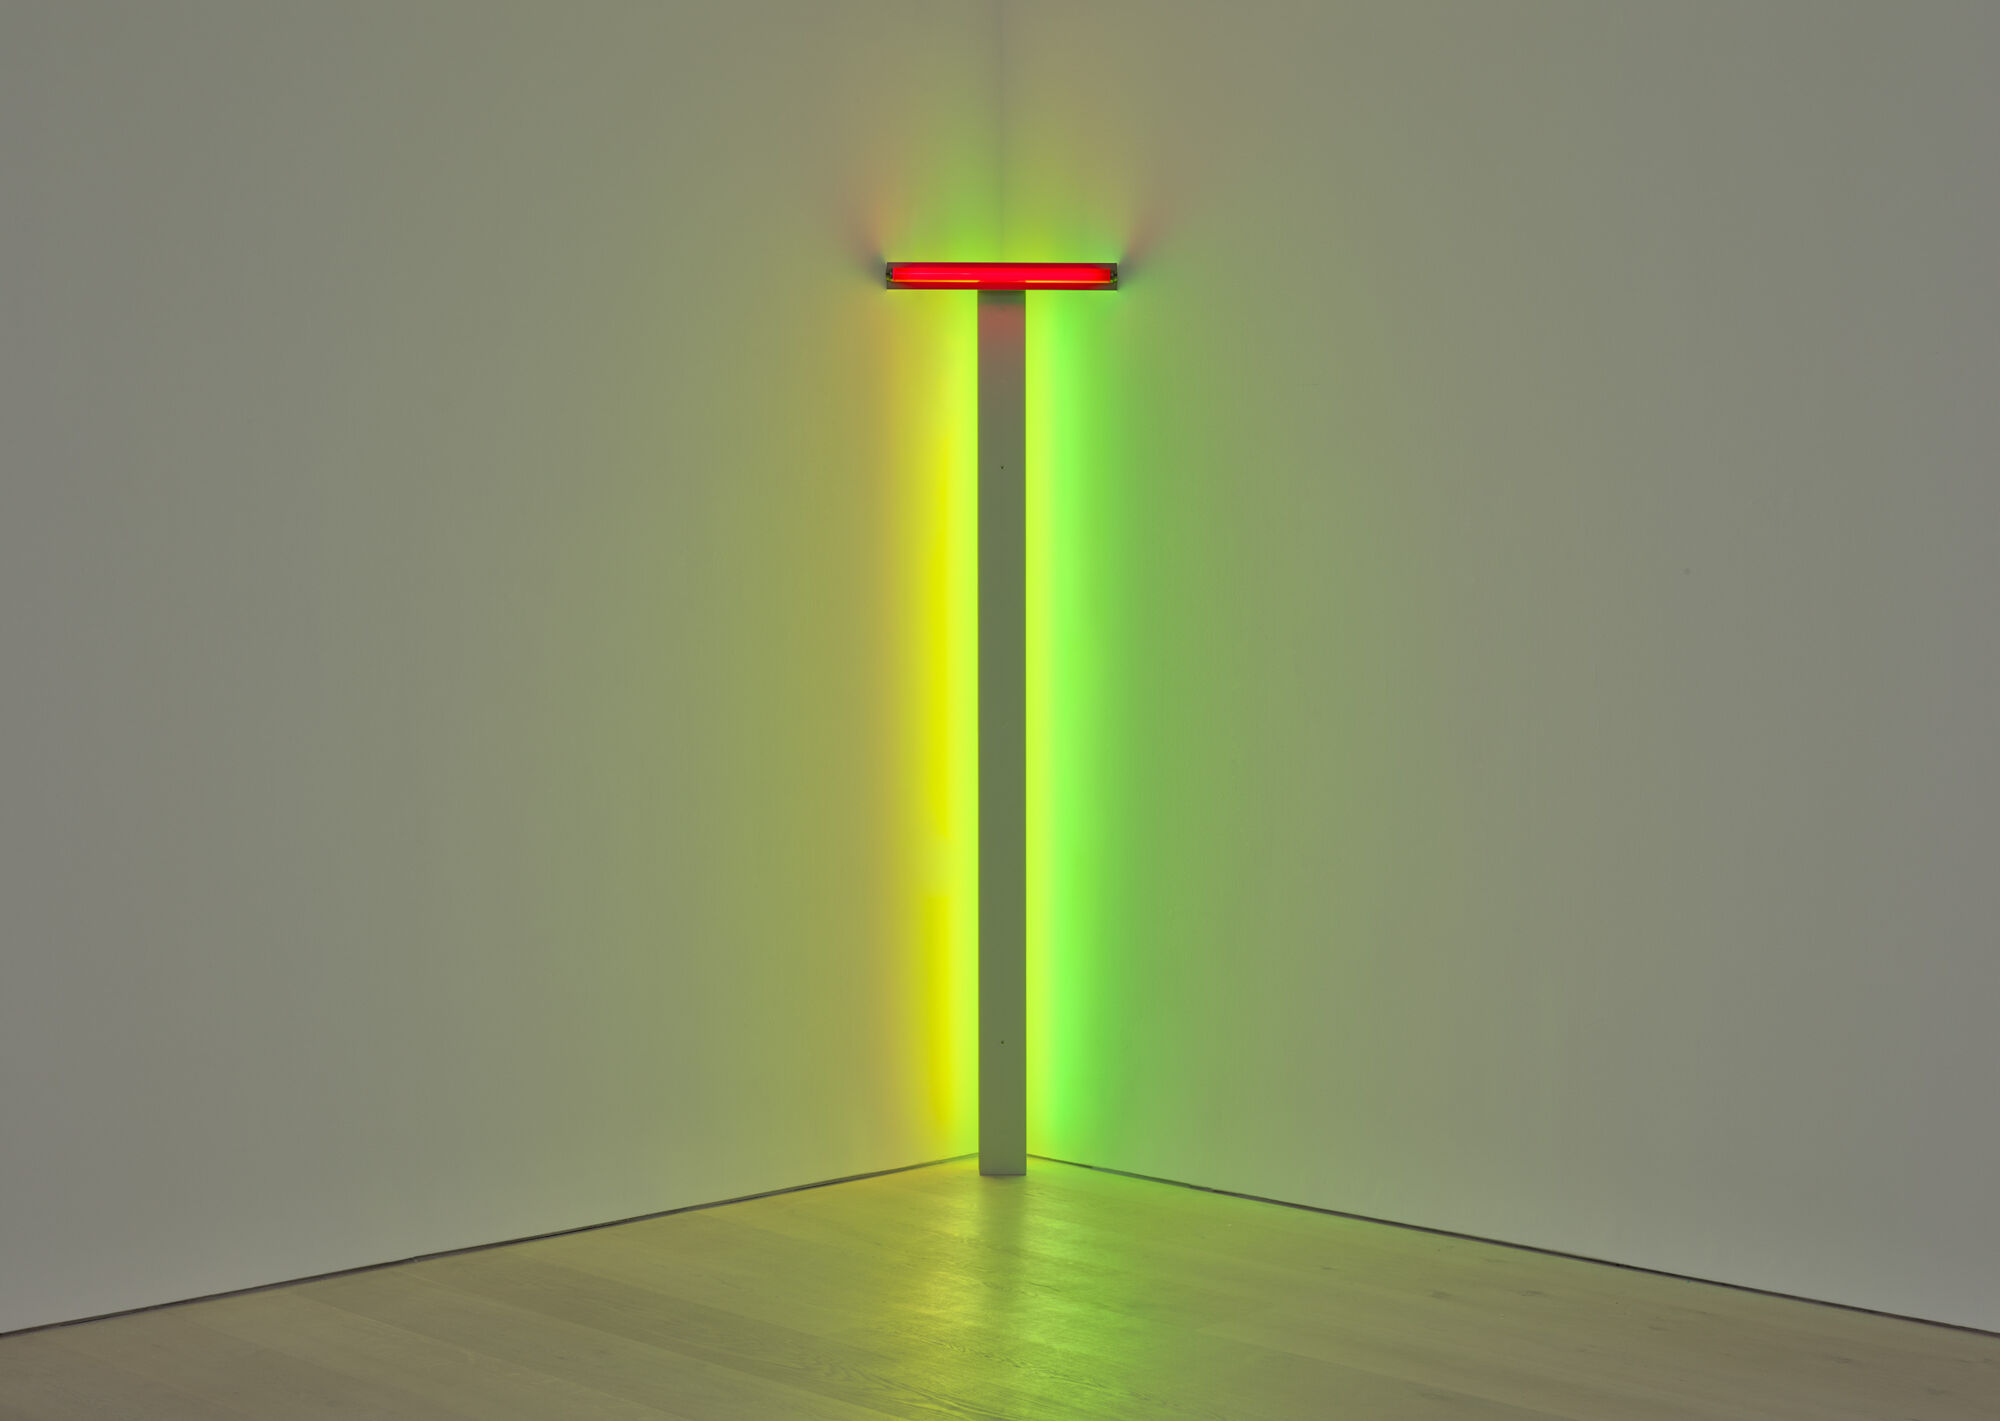 The Wick - Dan Flavin
untitled
1976
red, yellow, and green fluorescent light
© 2023 Stephen Flavin/Artists Rights Society (ARS), New York
Courtesy David Zwirner
